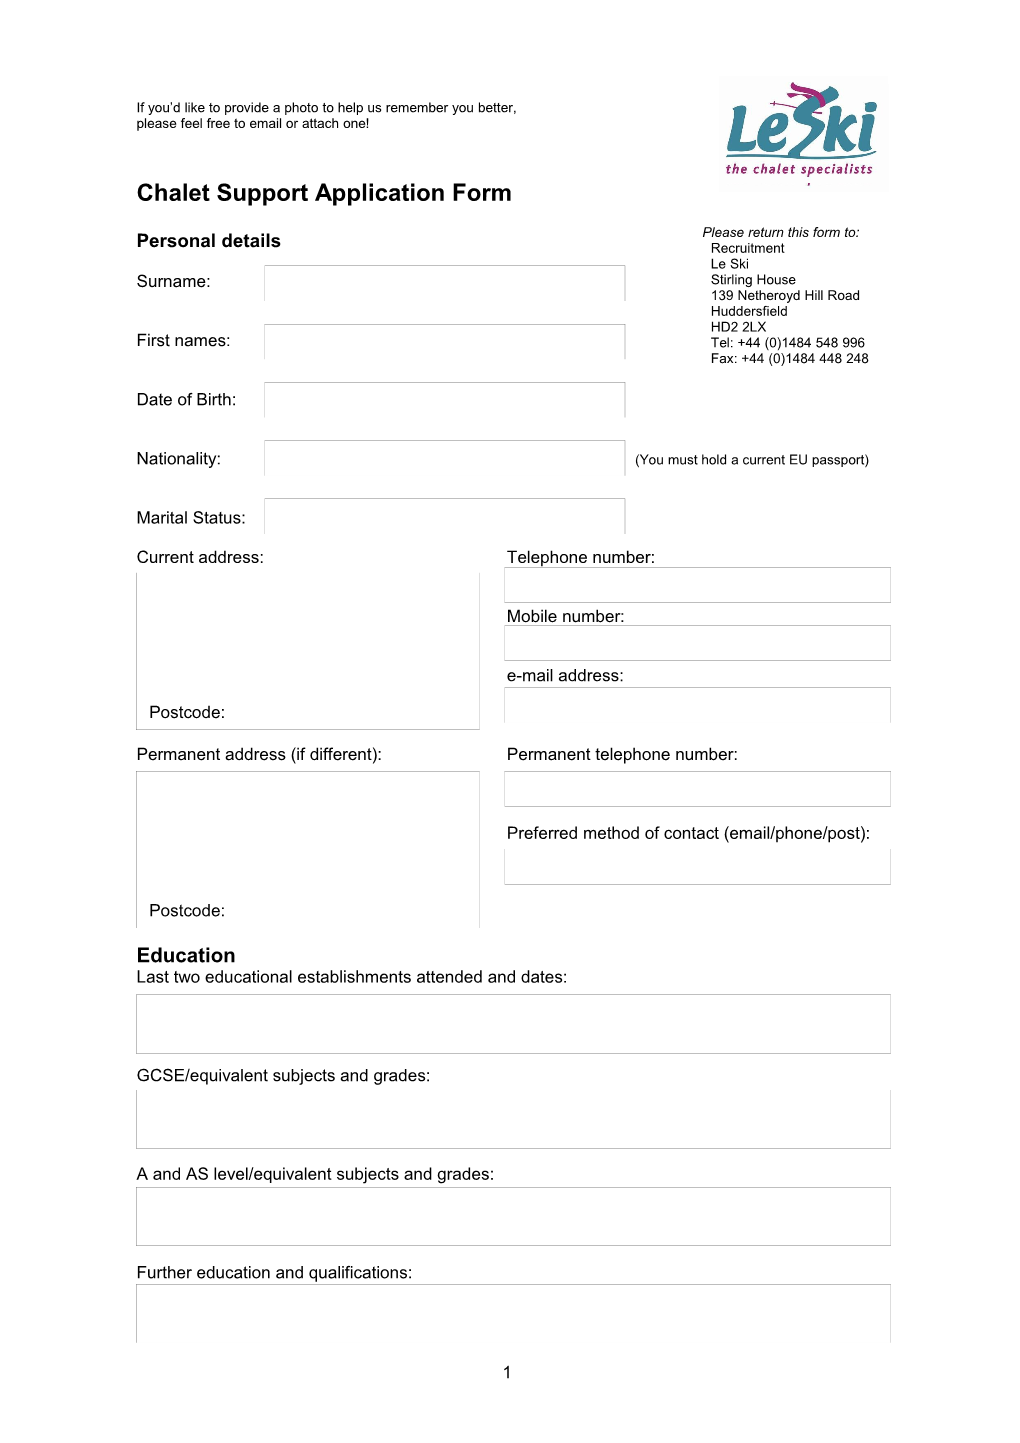 Chalet Support Application Form